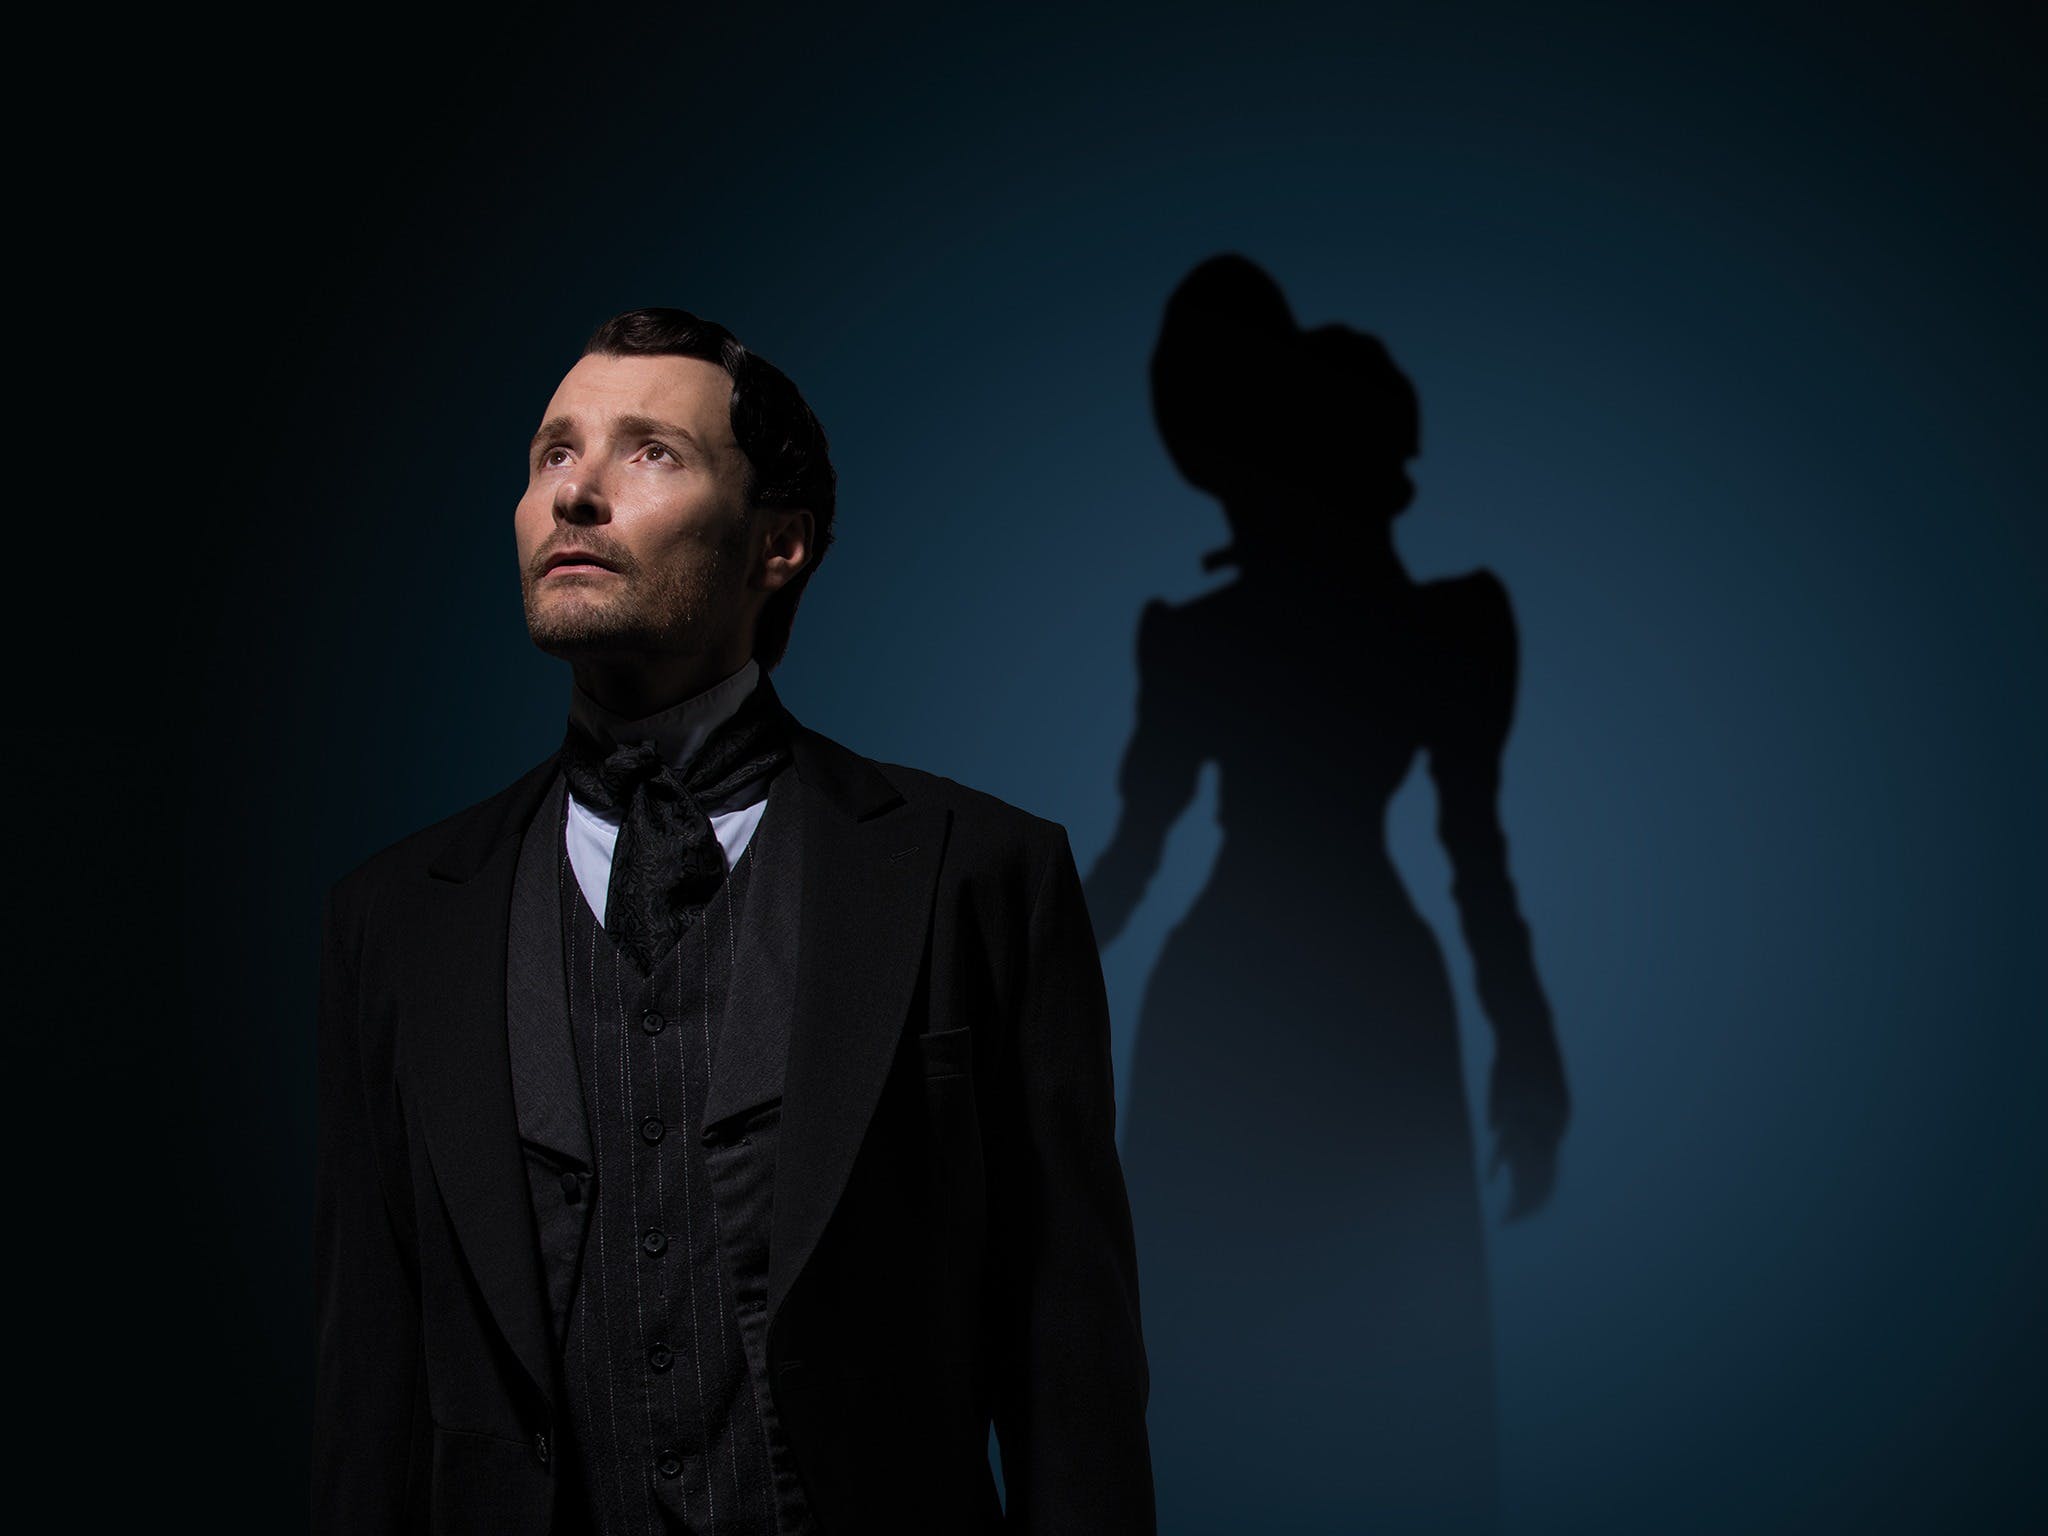 The Woman in Black by Susan Hill and Stephen Mallatrat - Accommodation Bookings